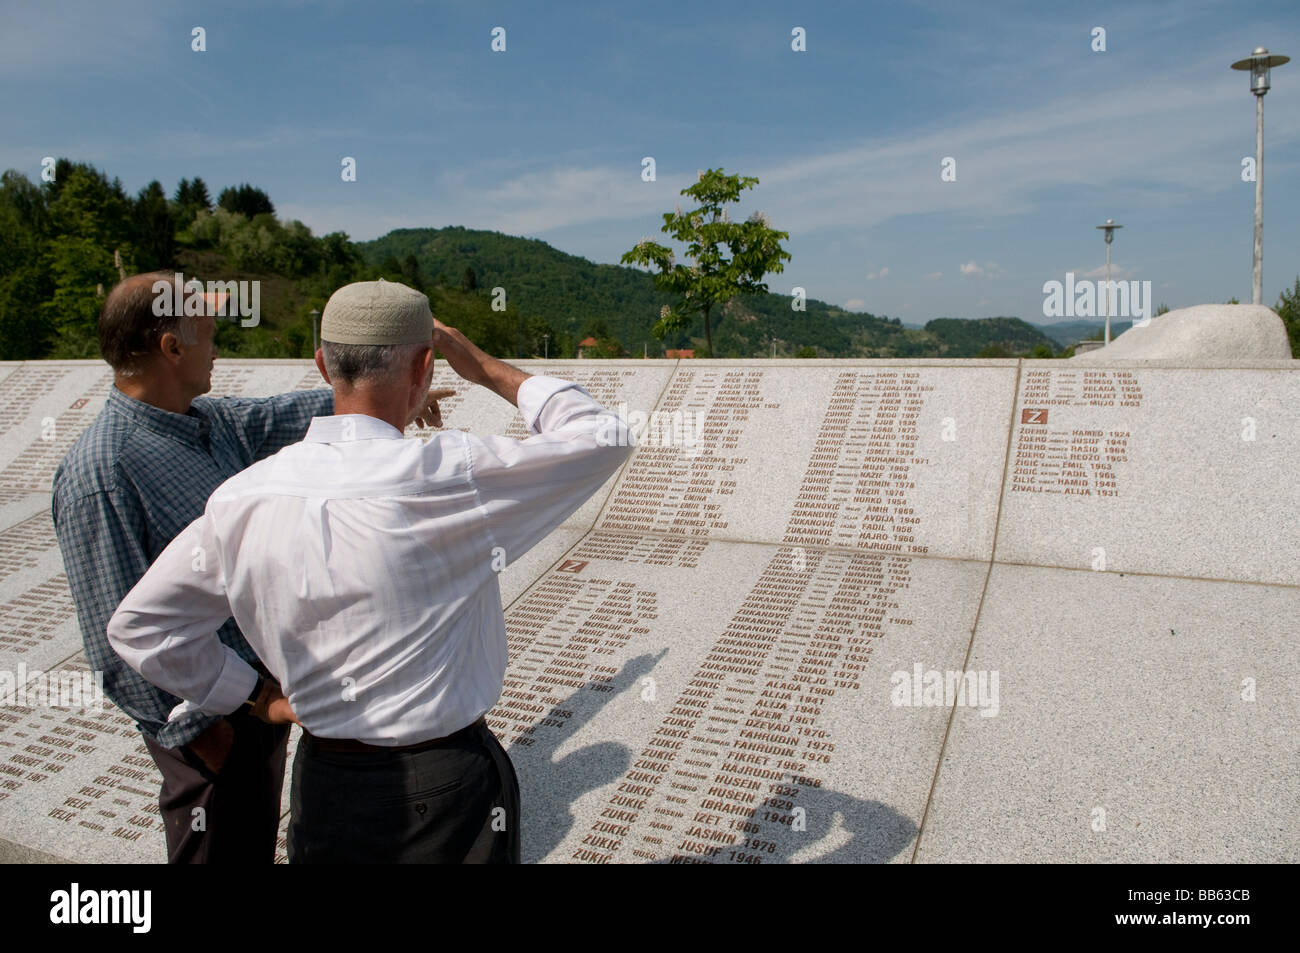 Bosniaks reading wall of names at Srebrenica Potocari Genocide memorial and cemetery for over 3000 victims of 1995 Genocide in Bosnia and Herzegovina Stock Photo